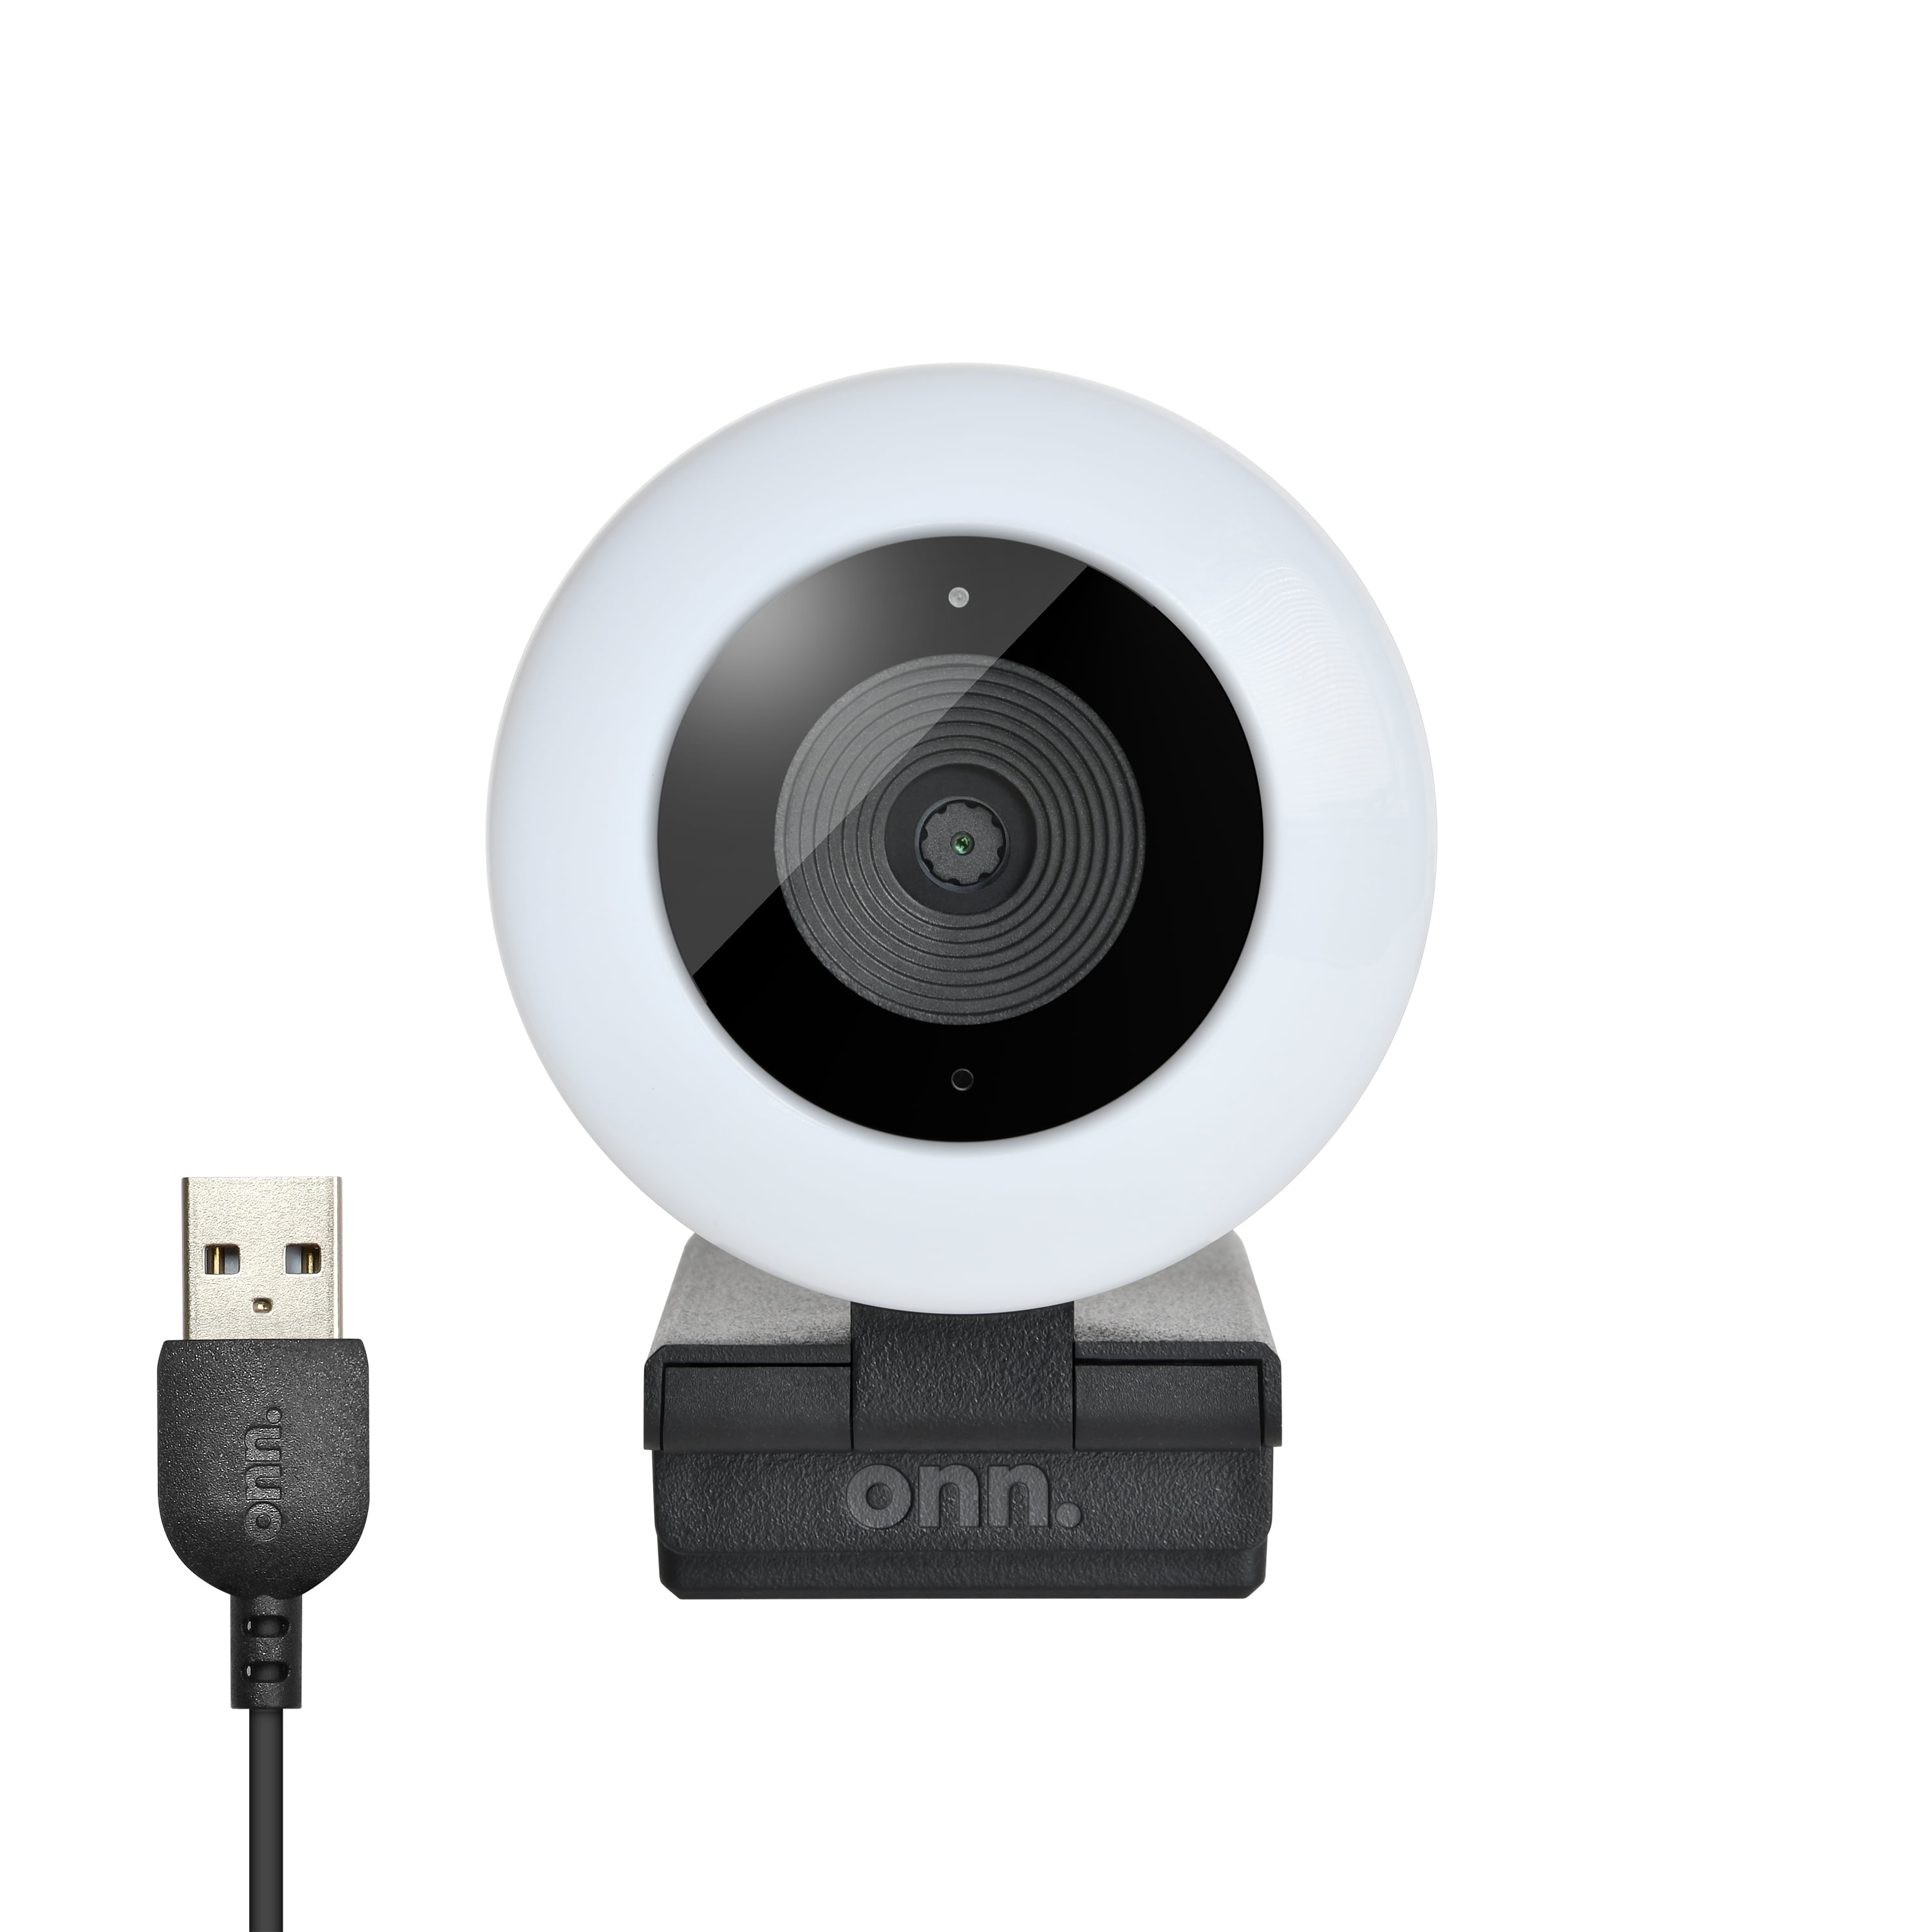 onn. Webcam with Ring Light-3 LED levels, Autofocus, Up to 1440p Resolution, Built-in Microphone